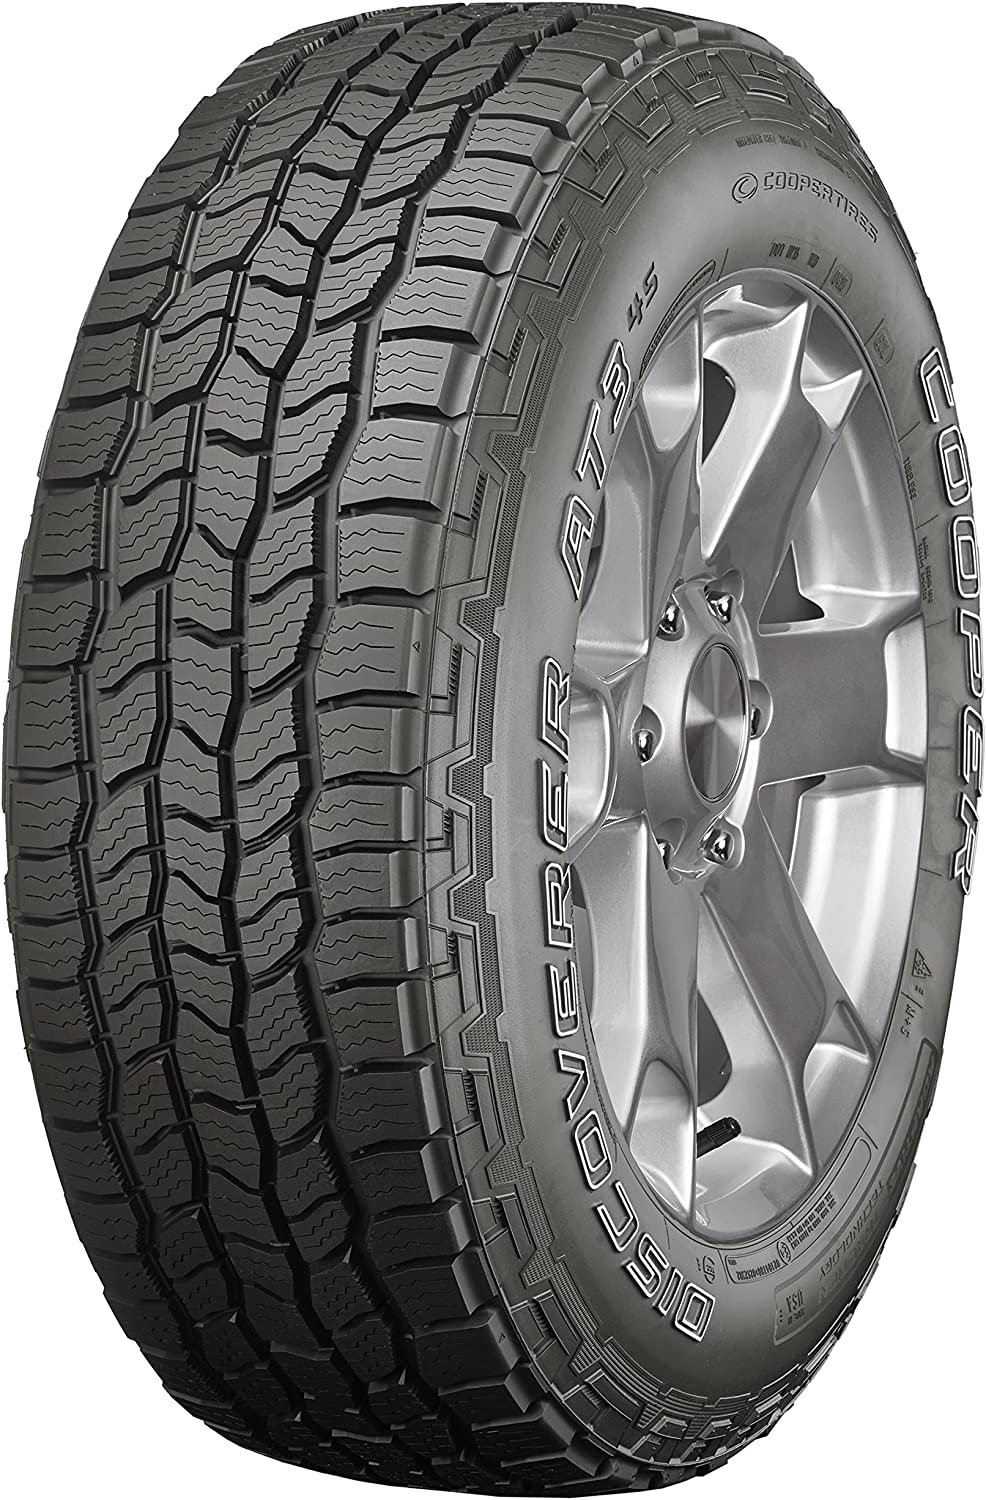 Cooper Discover AT3 4S All-Season 265/75R15 112T Tires